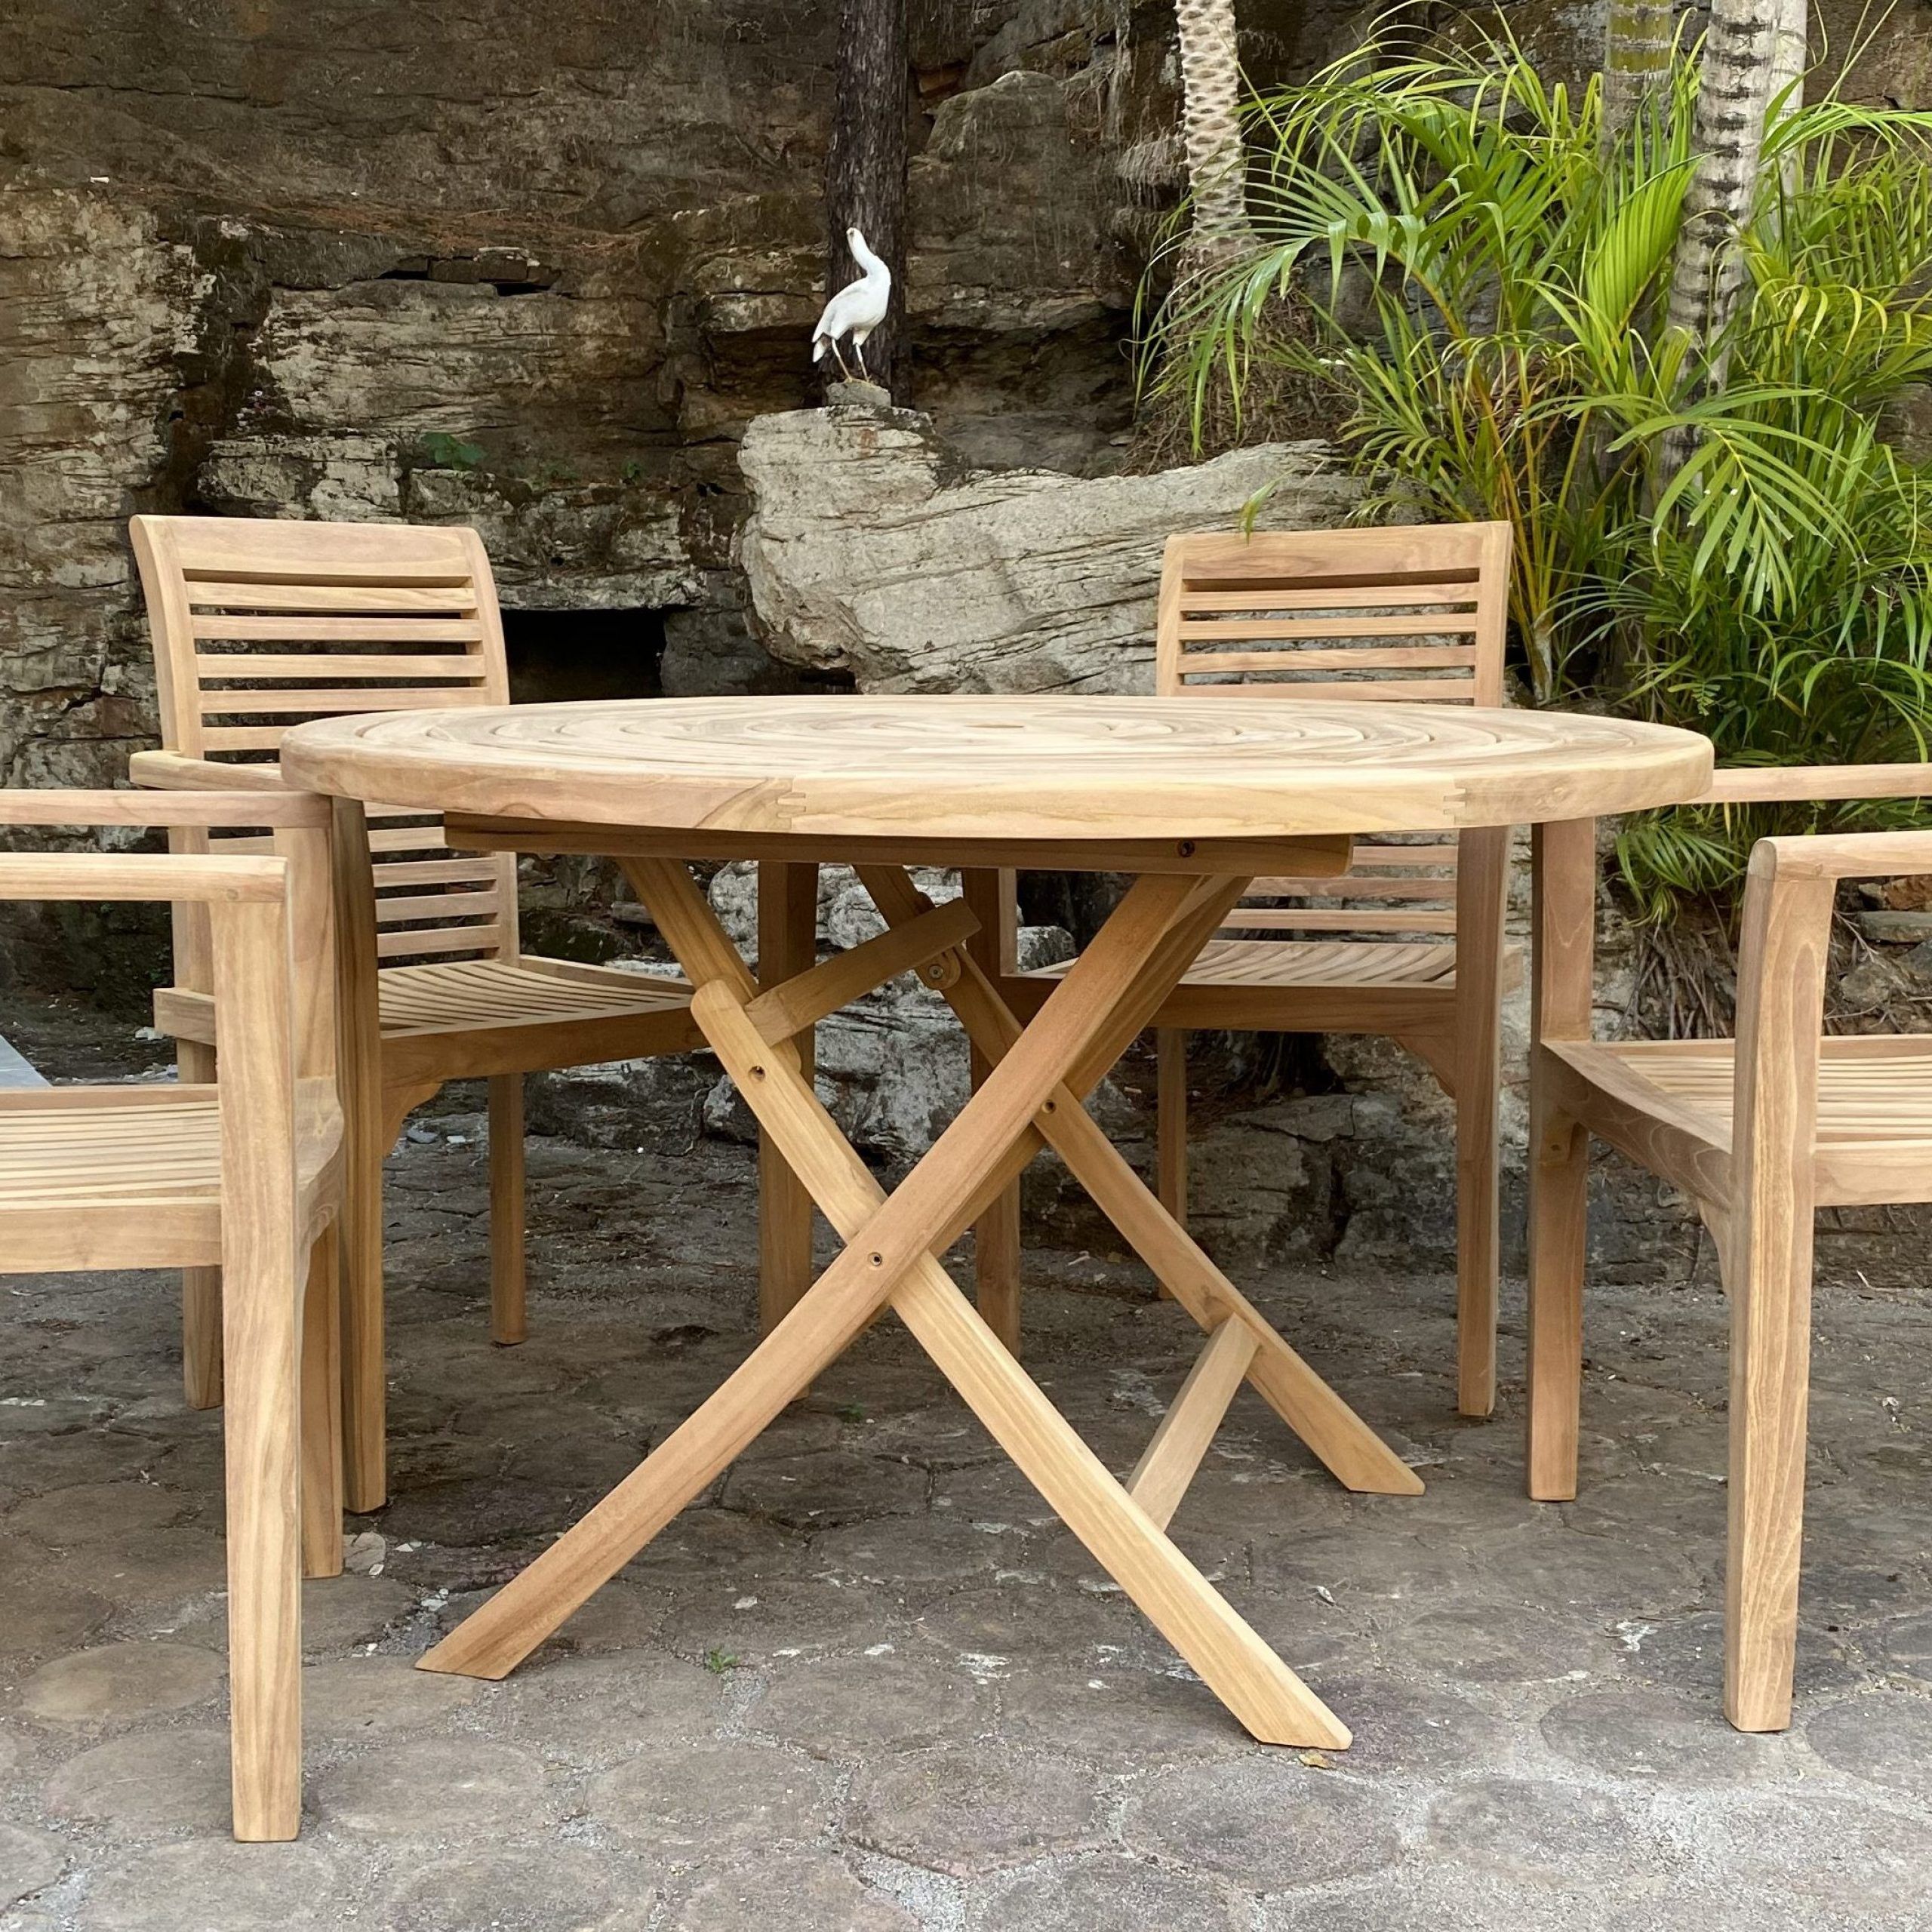 Solid Teak Wood Outdoor Tables Inside Well Known Indonesia Indoor Teak Furniture Manufacturer And Exporter – Indonesia Solid  Teak Furniture Manufacturer (View 9 of 15)